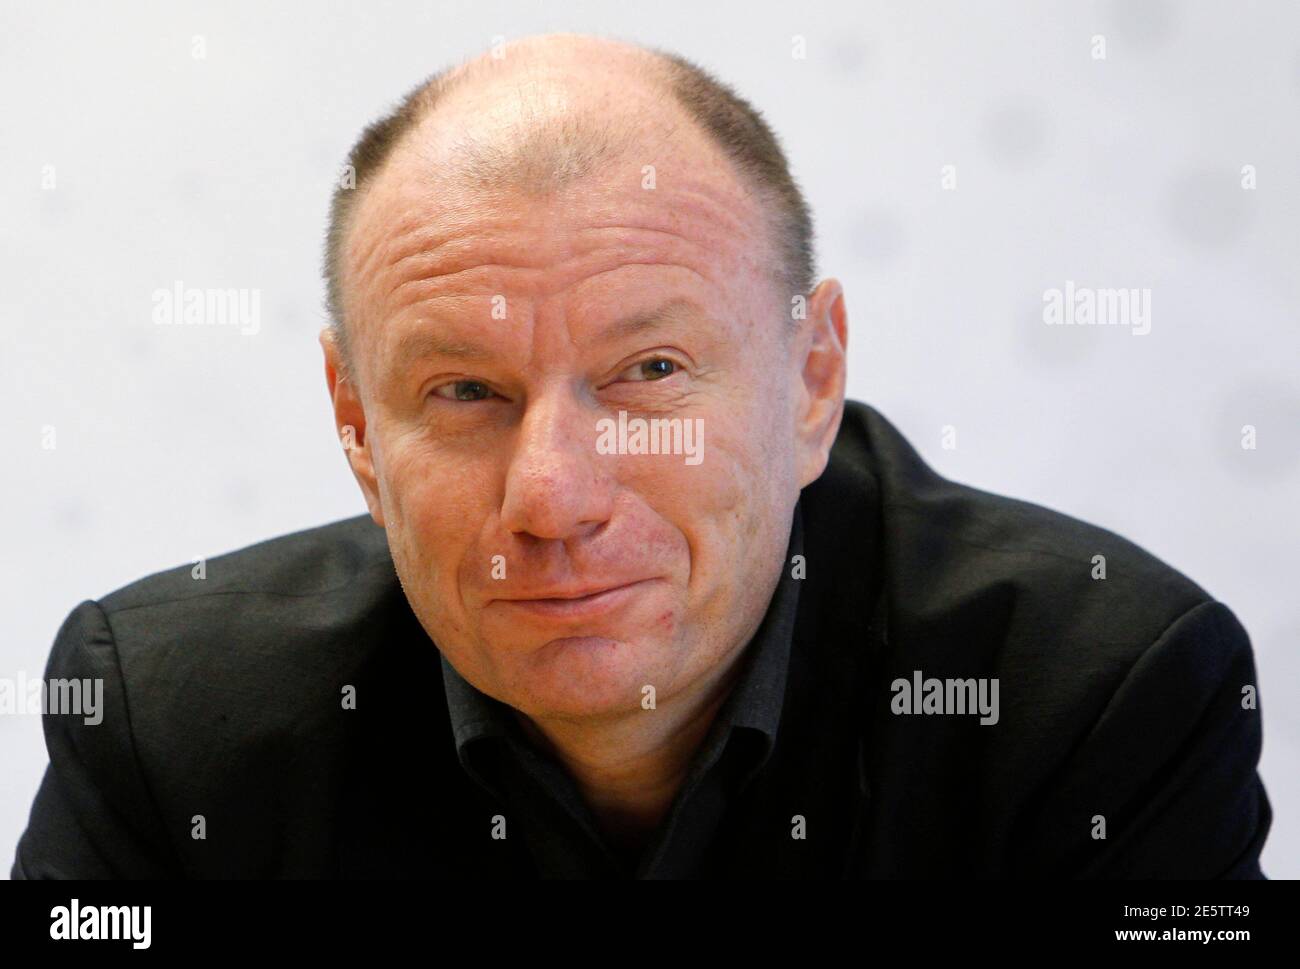 Interros Founder and Owner Vladimir Potanin attends the Reuters Russia Investment Summit in Moscow September 13, 2011. REUTERS/Denis Sinyakov (RUSSIA - Tags: BUSINESS) Stock Photo